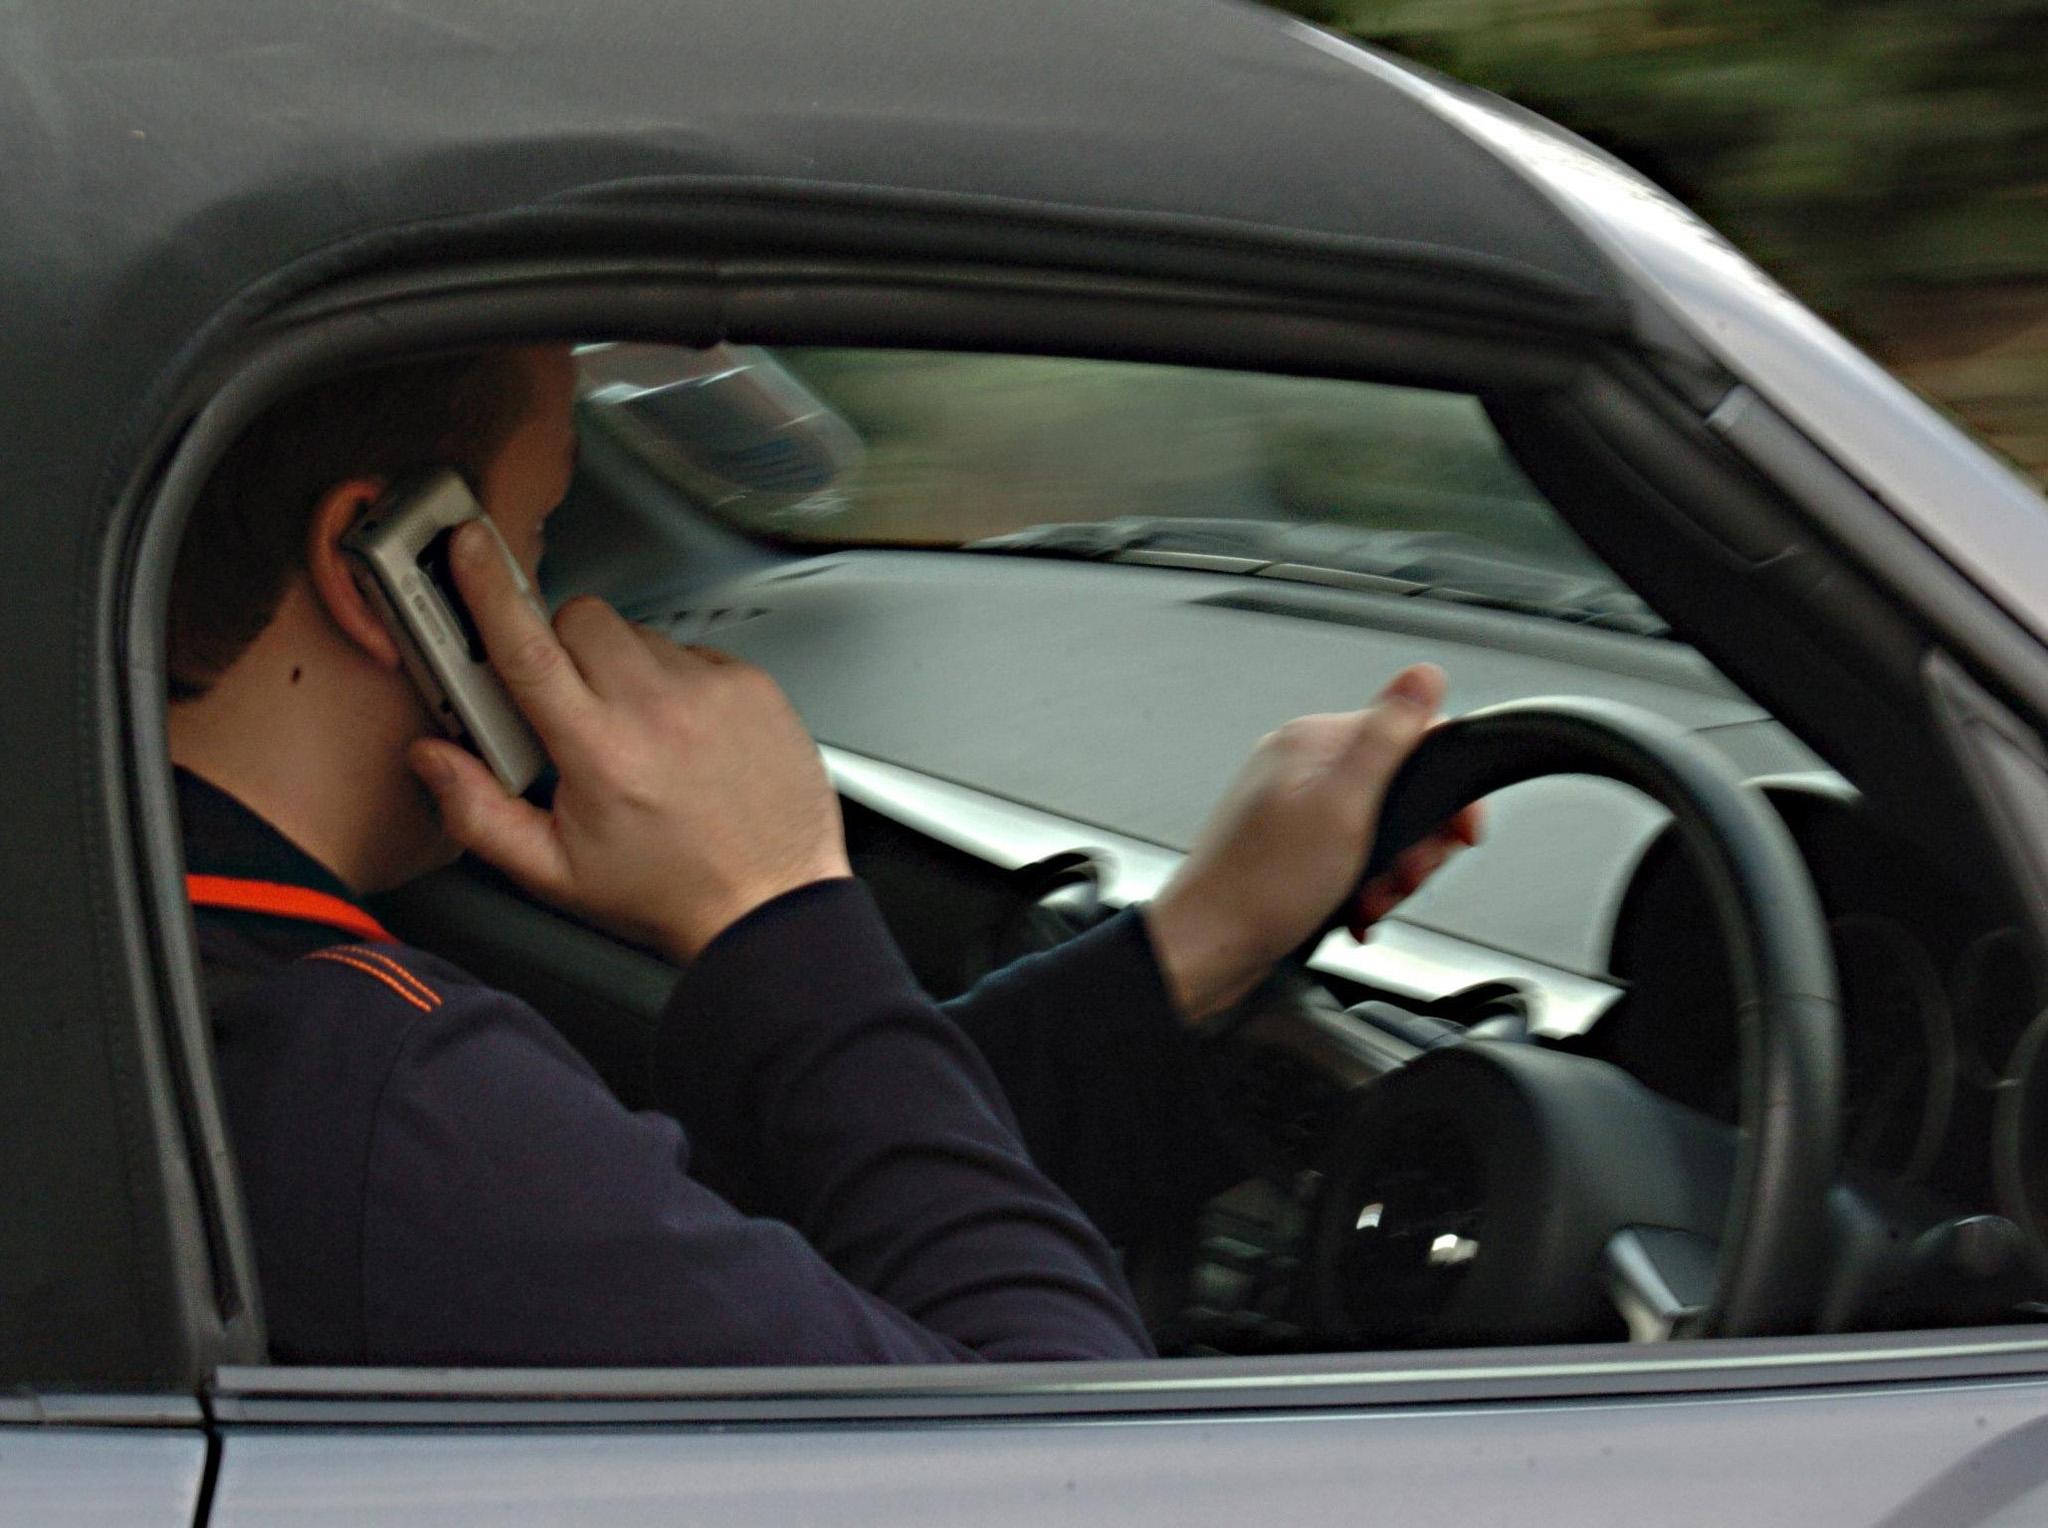 Drivers on the road for less than two years would have their licence revoked